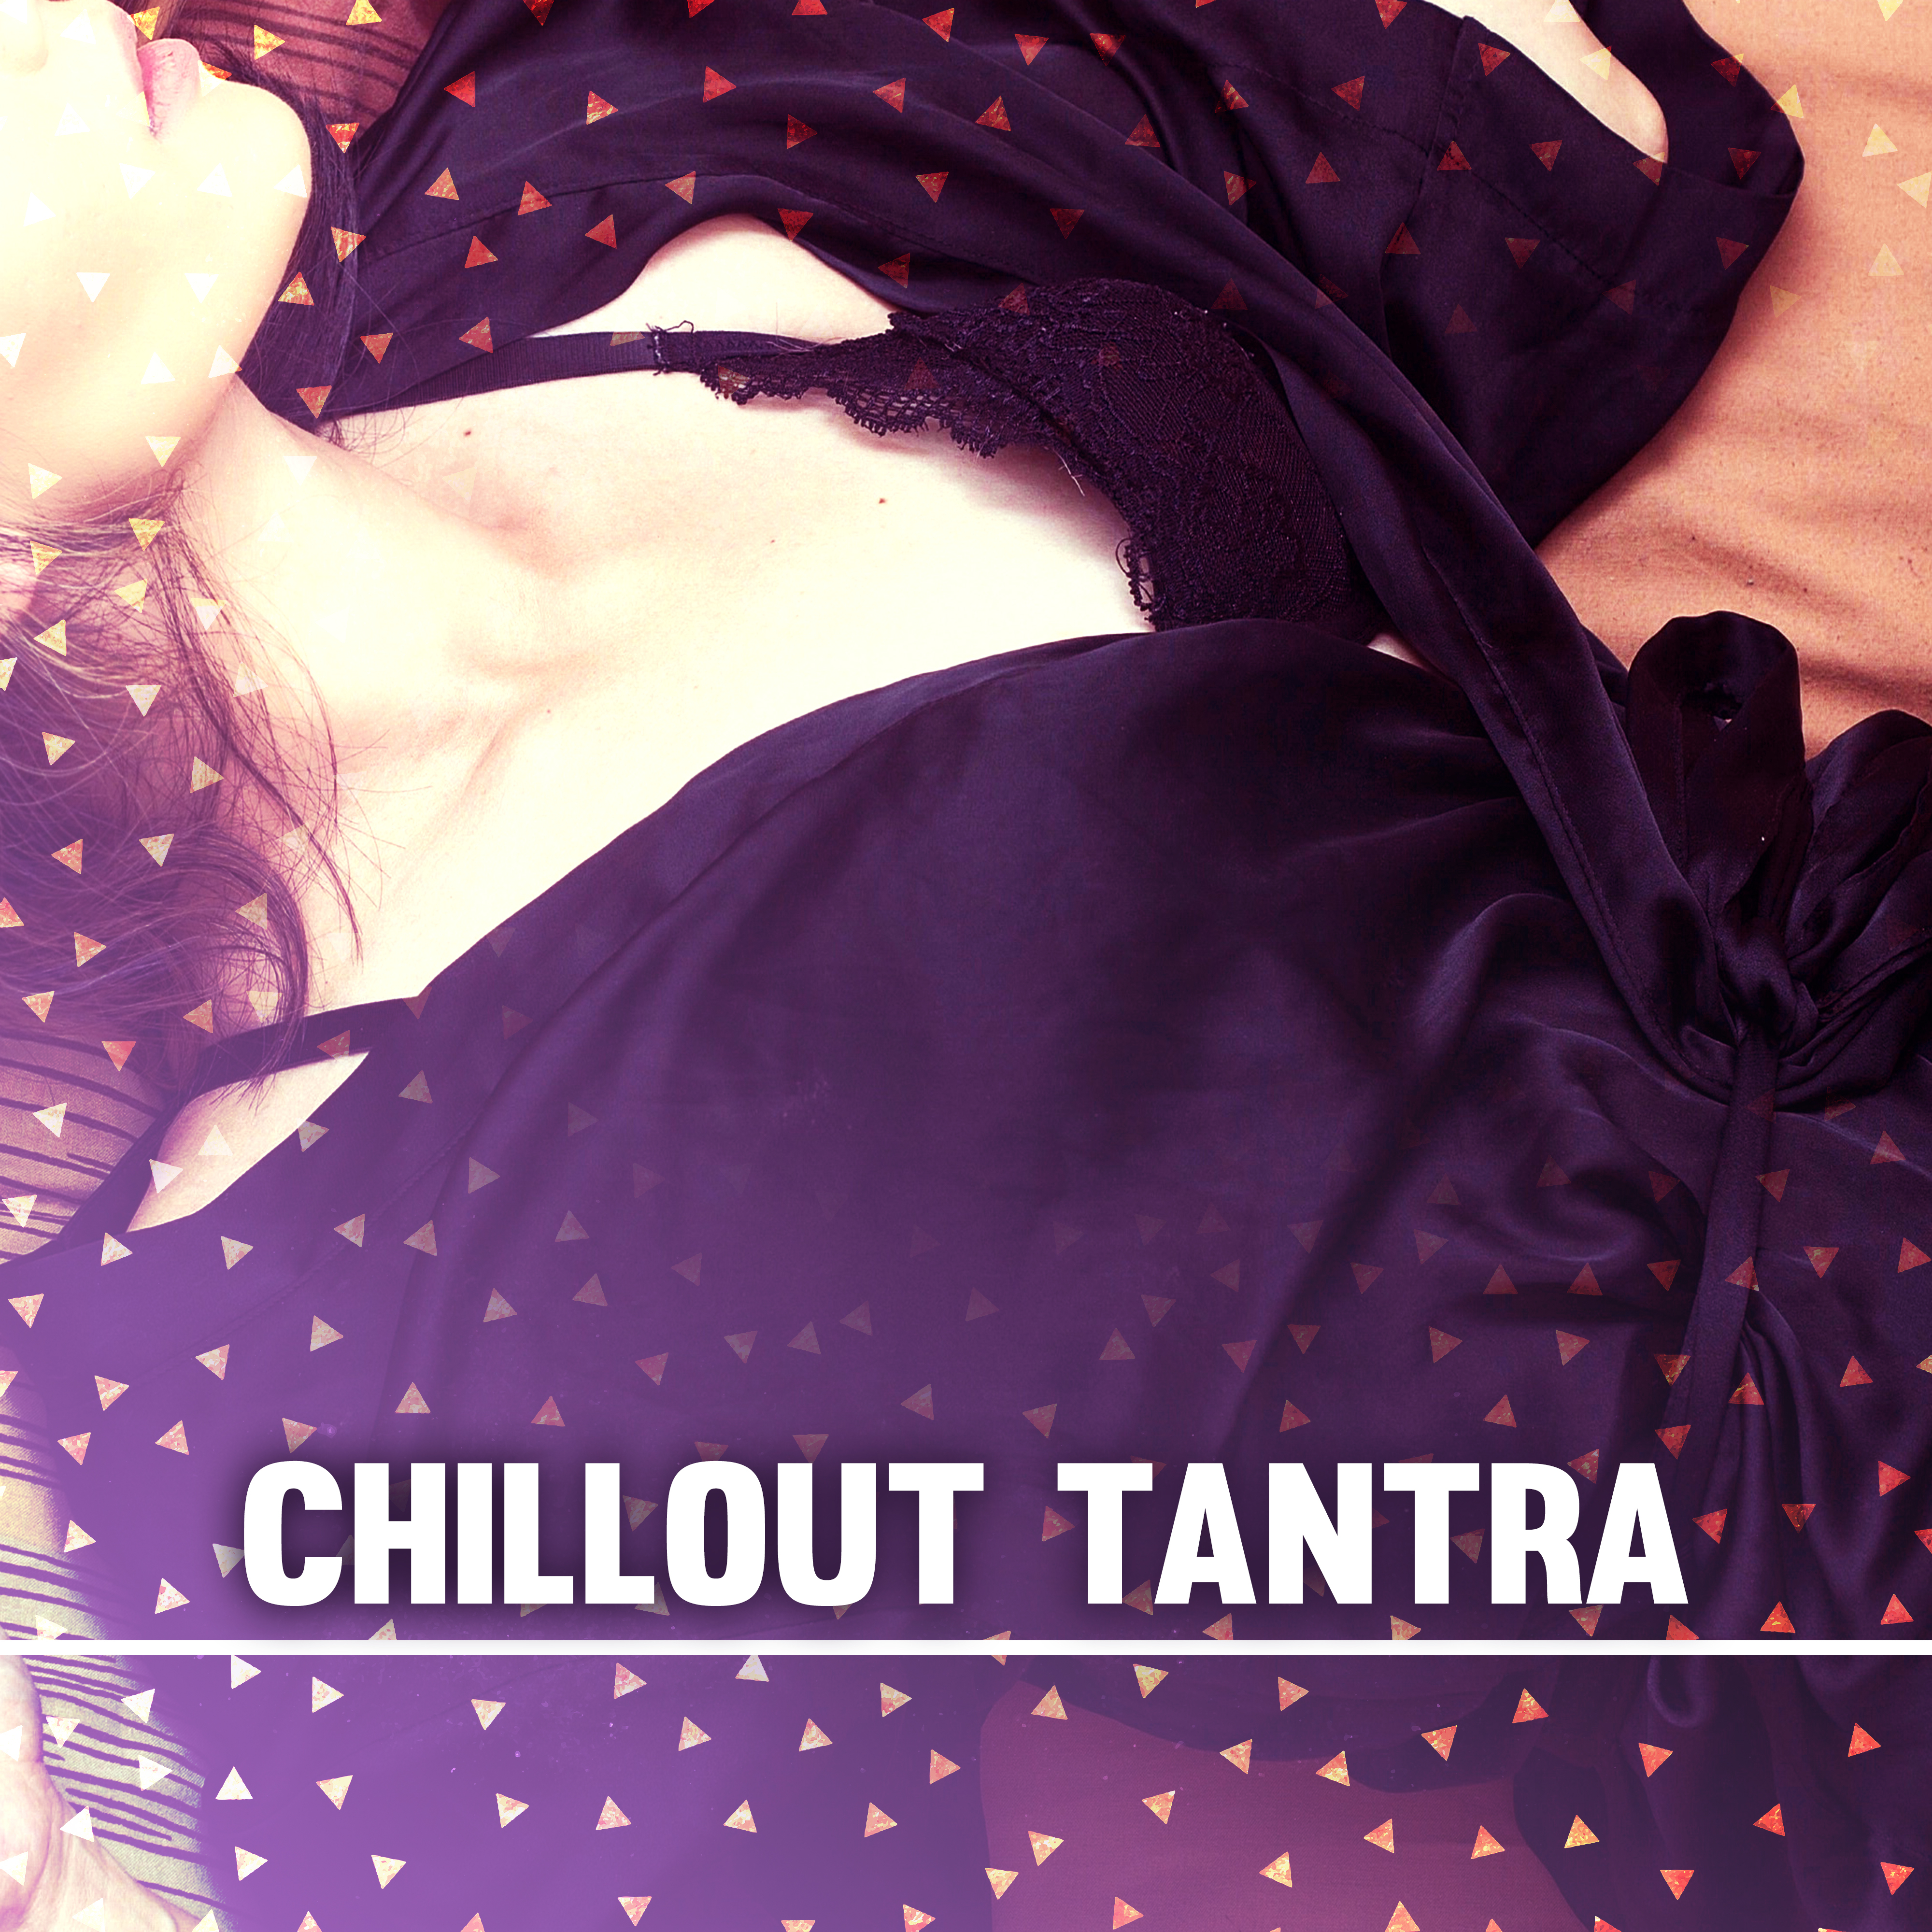 Chillout Tantra  Deep Chillout, Erotic Lounge,  Chillout, Tantric , Massage Music